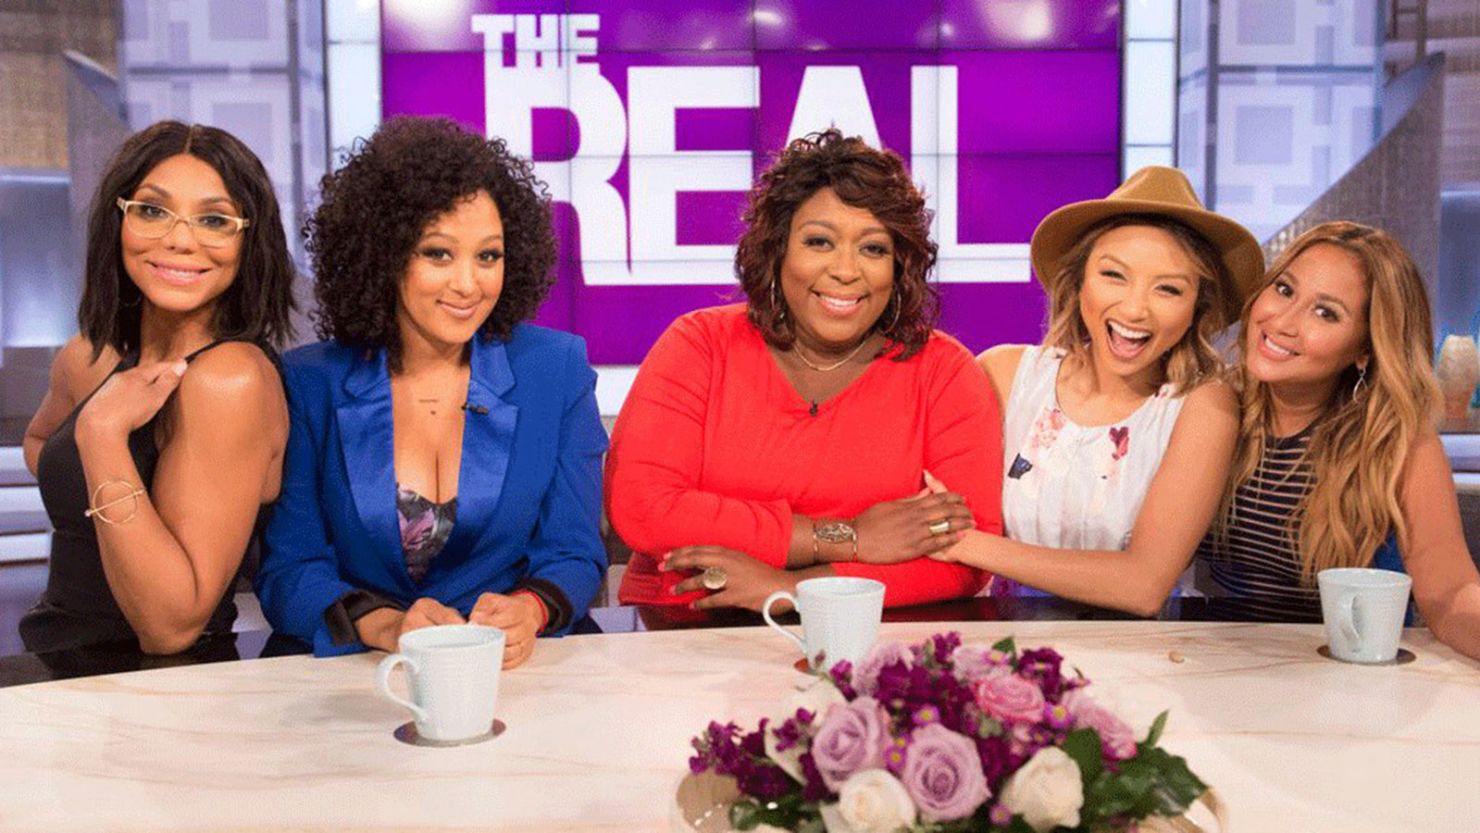 Tamar Braxton, Tamera Mowry-Housley, Loni Love, Jeannie Mai and Adrienne Bailon hosted "The Real" for two seasons. 